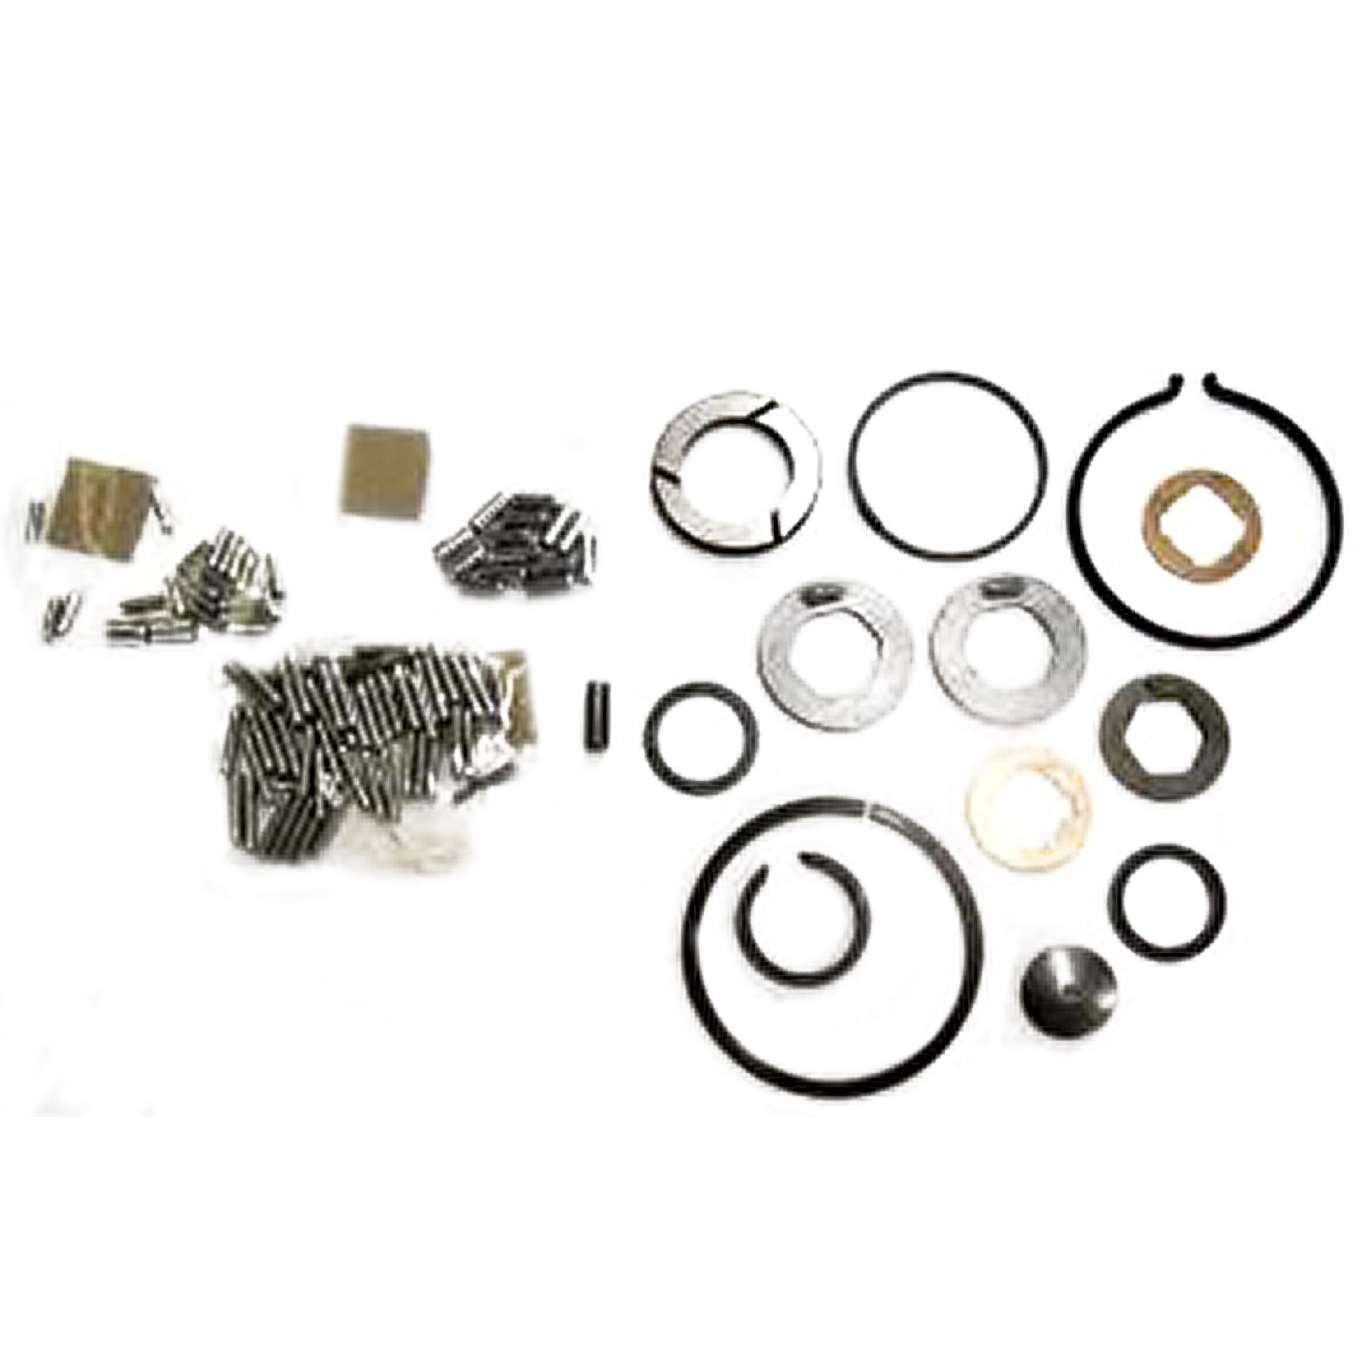 1955-1963 Transmission Small Parts Kit 3-Speed Chevrolet and GMC Pickup Truck